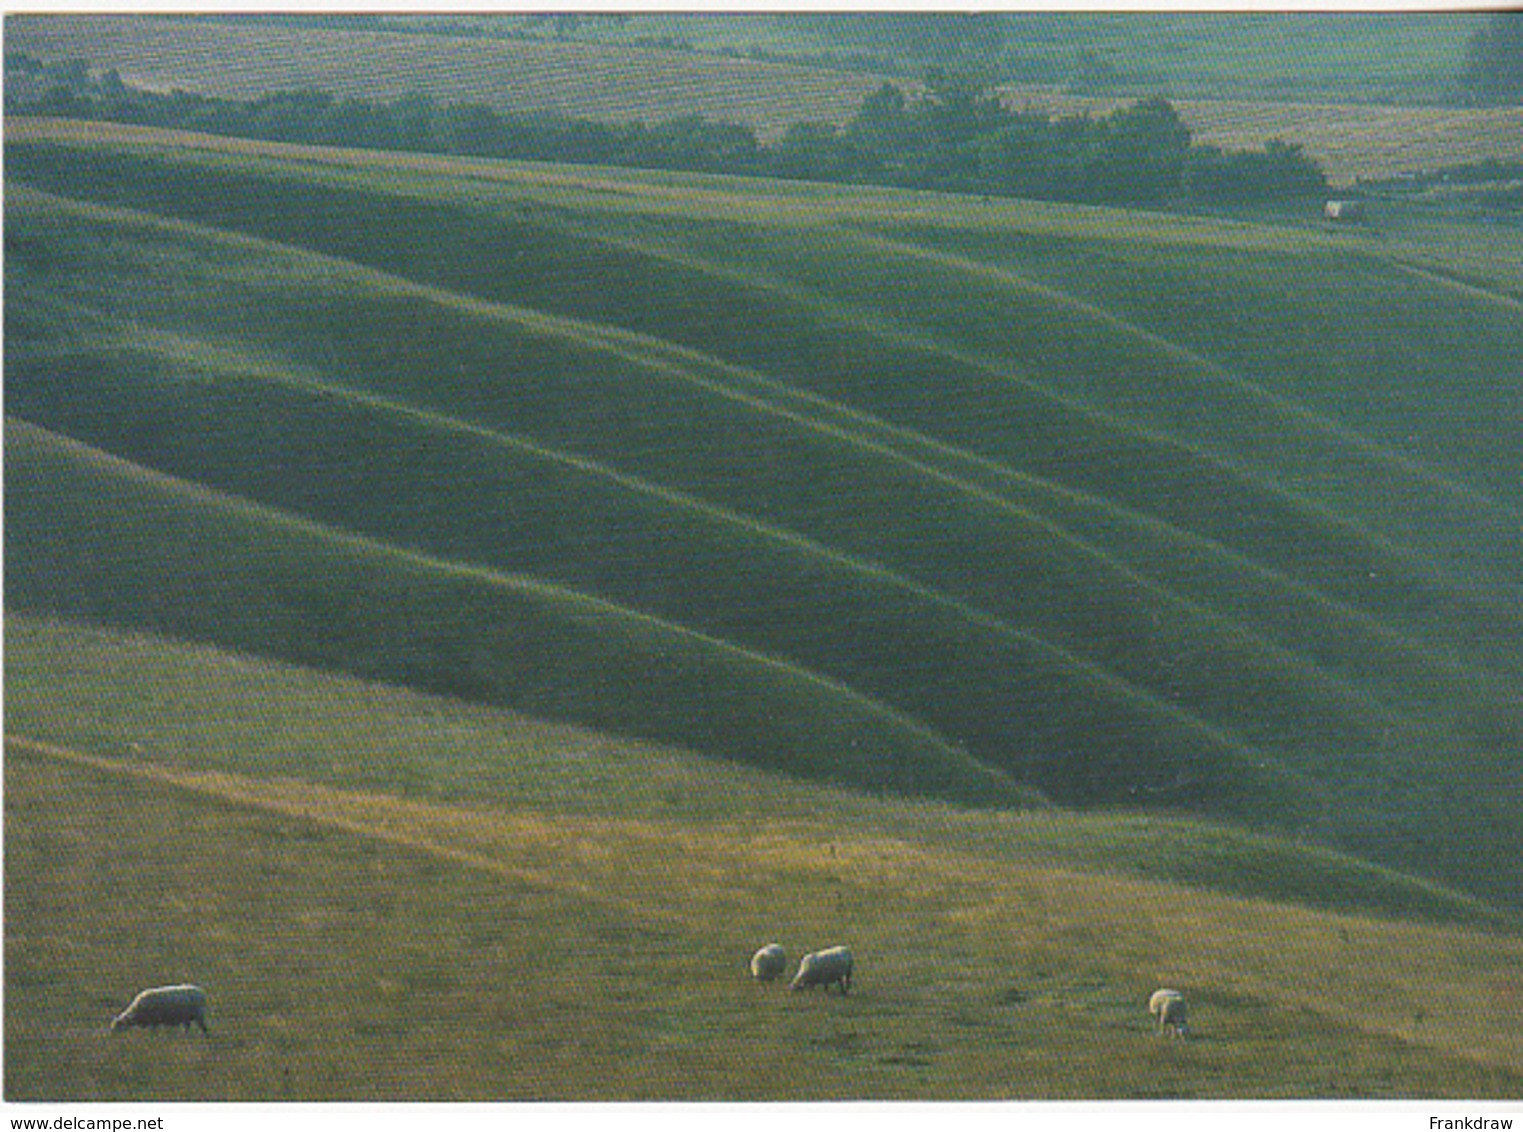 Postcard - A View Of Wessex, At Uffington Castle, Berkshire - Photo By Colin Molyneux - Card No.Wes 005 - VG - Unclassified